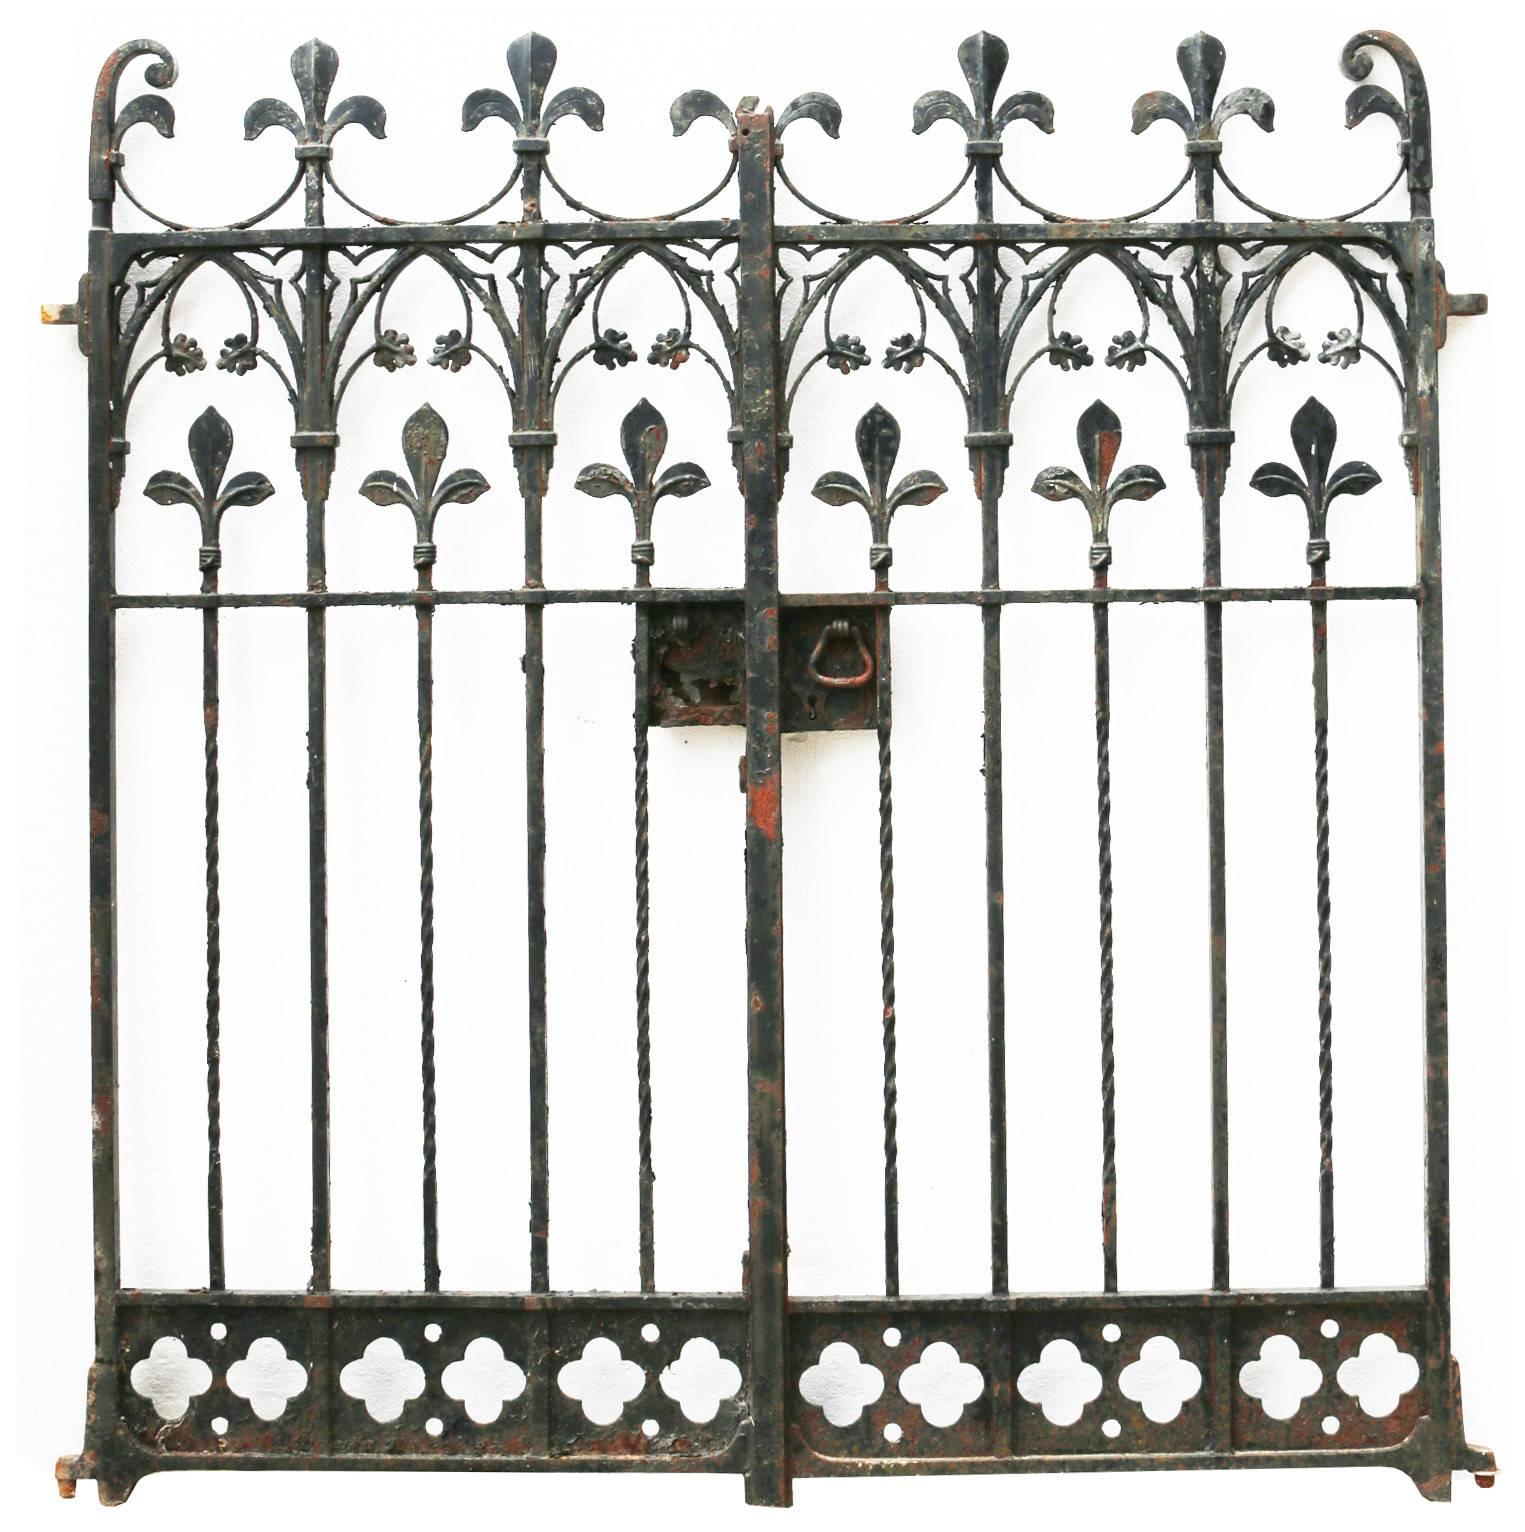 These gates include a working handle and latch.
The width includes the hinges.